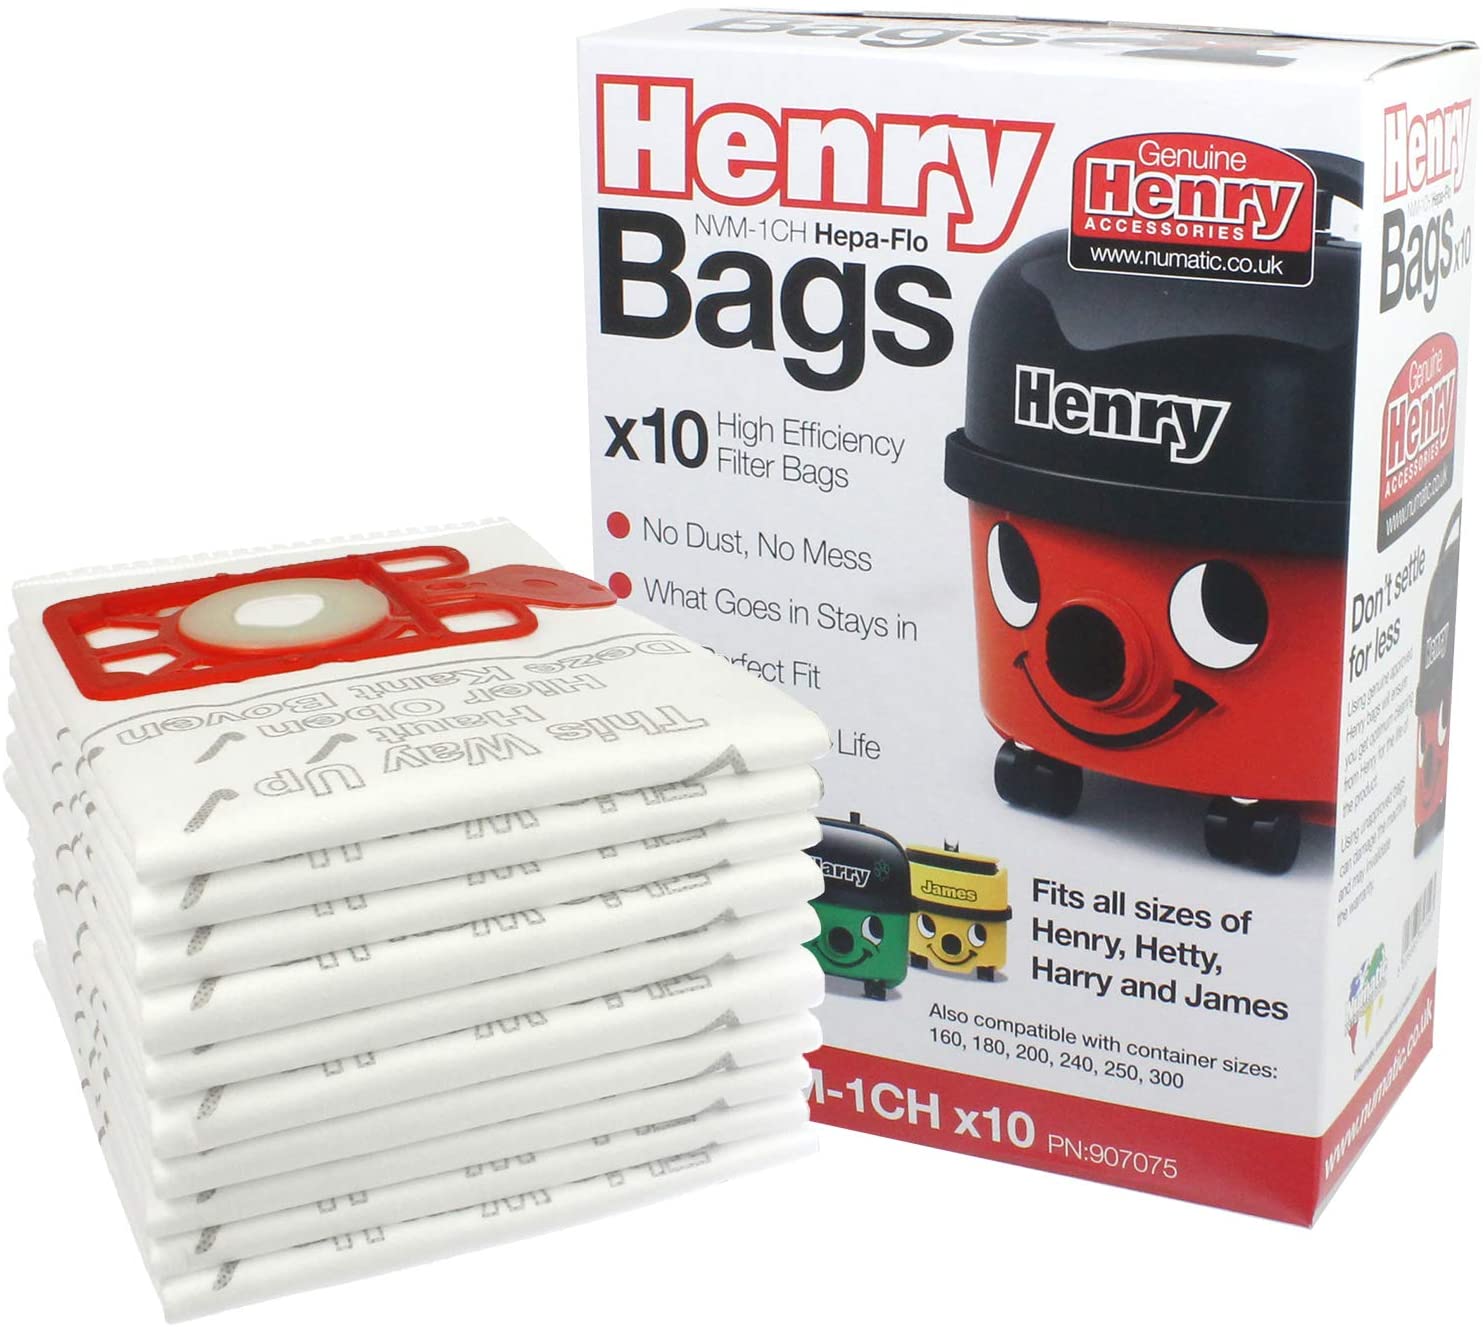 Genuine-Numatic-NVM-1CH-Numatic-Henry-and-James-Cleaner-Bags-Pack-of-10